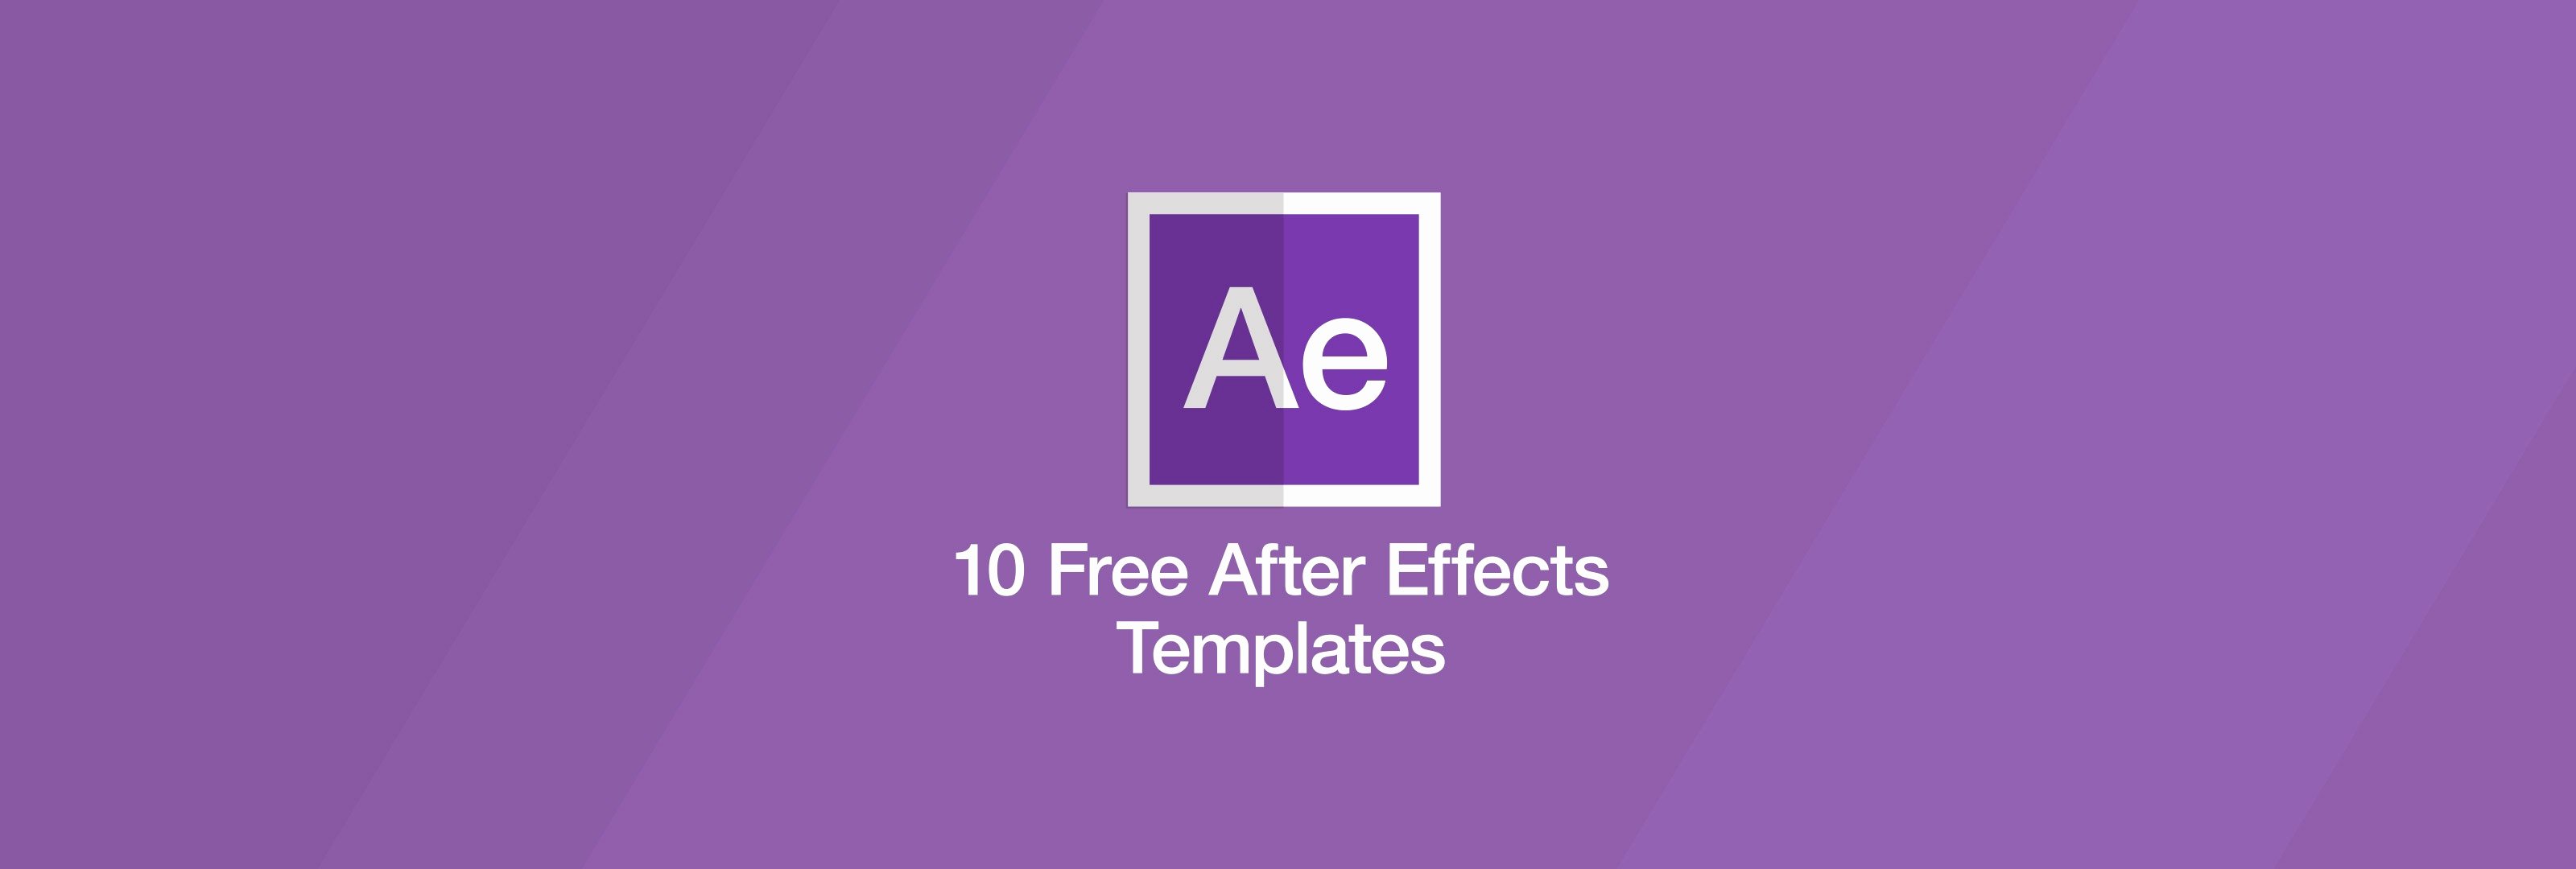 After Effects Templates Free